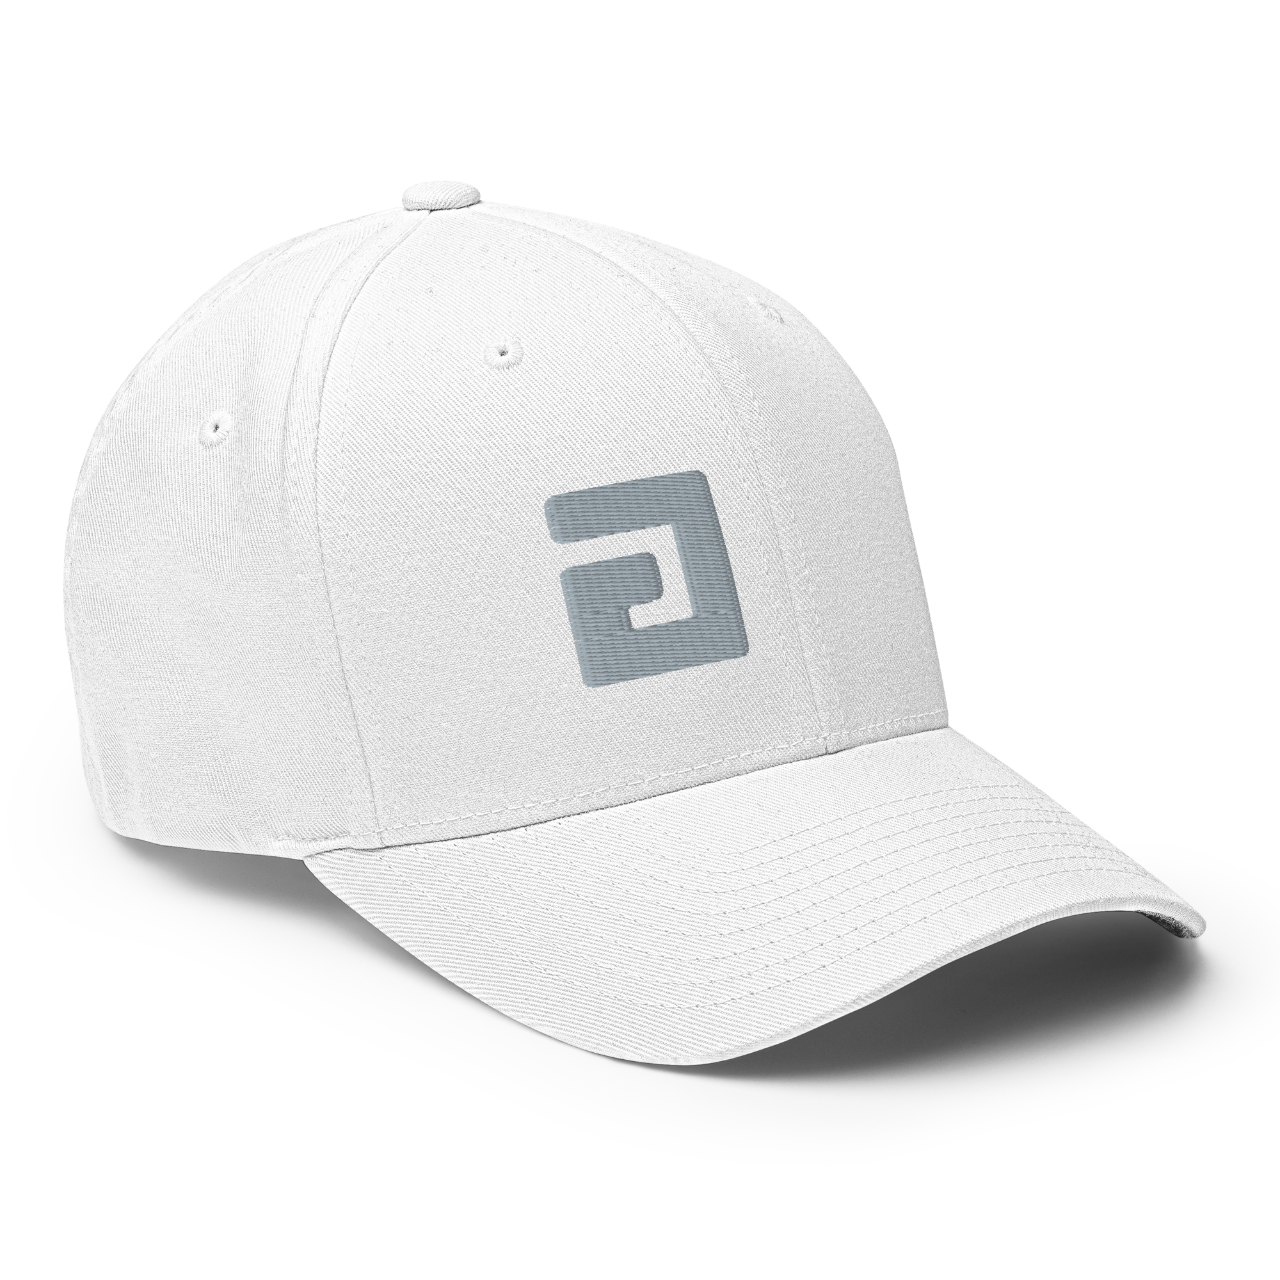 axsgtr axess electronics guitar music industry branded merchandise swag flexfit closed back baseball cap hat white grey